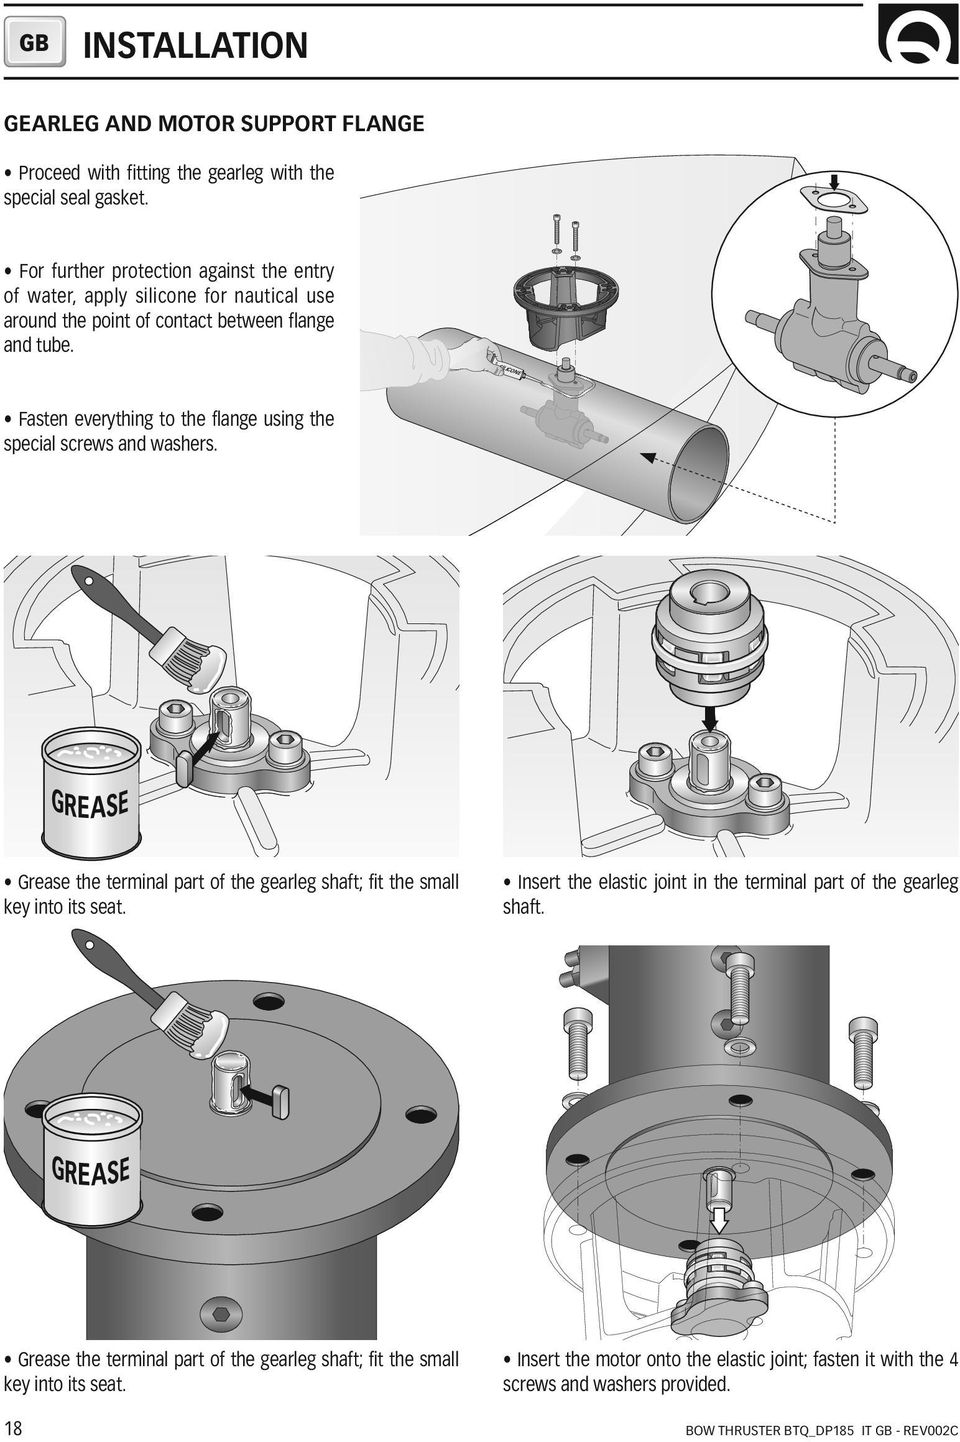 Fasten everything to the flange using the special screws and washers. Grease the terminal part of the gearleg shaft; fit the small key into its seat.